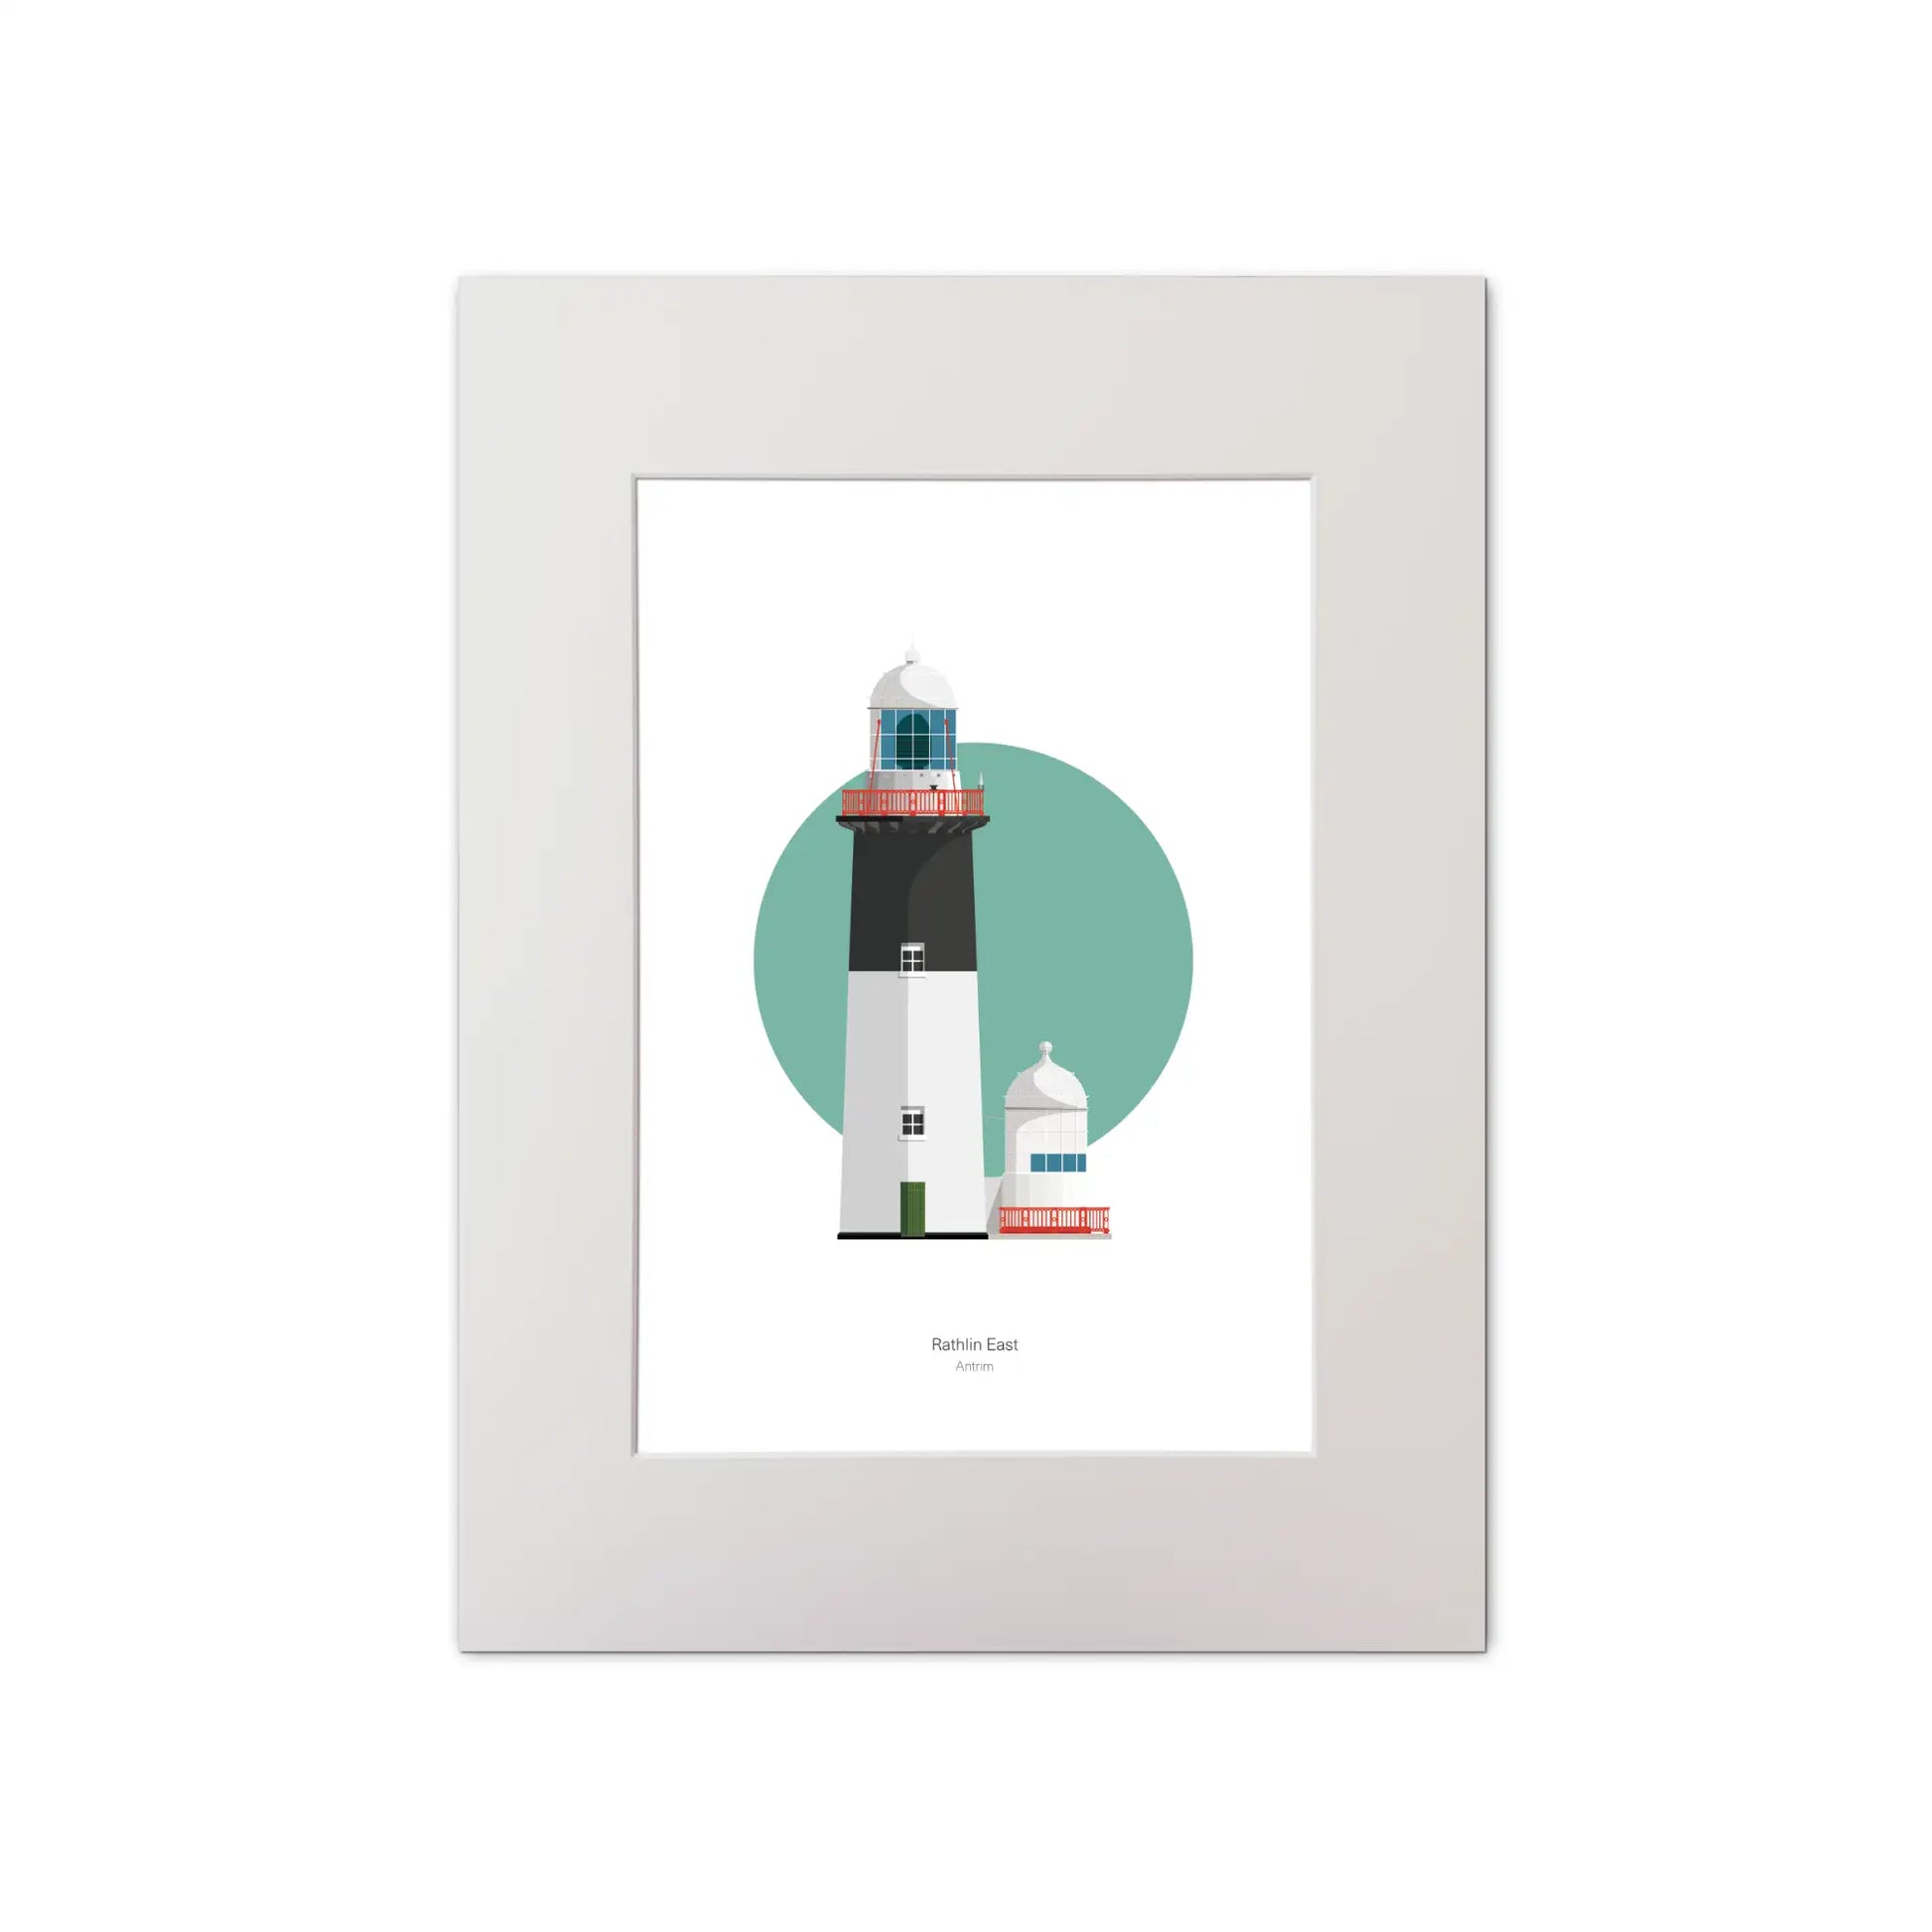 Illustration of Rathlin East lighthouse on a white background inside light blue square, mounted and measuring 30x40cm.